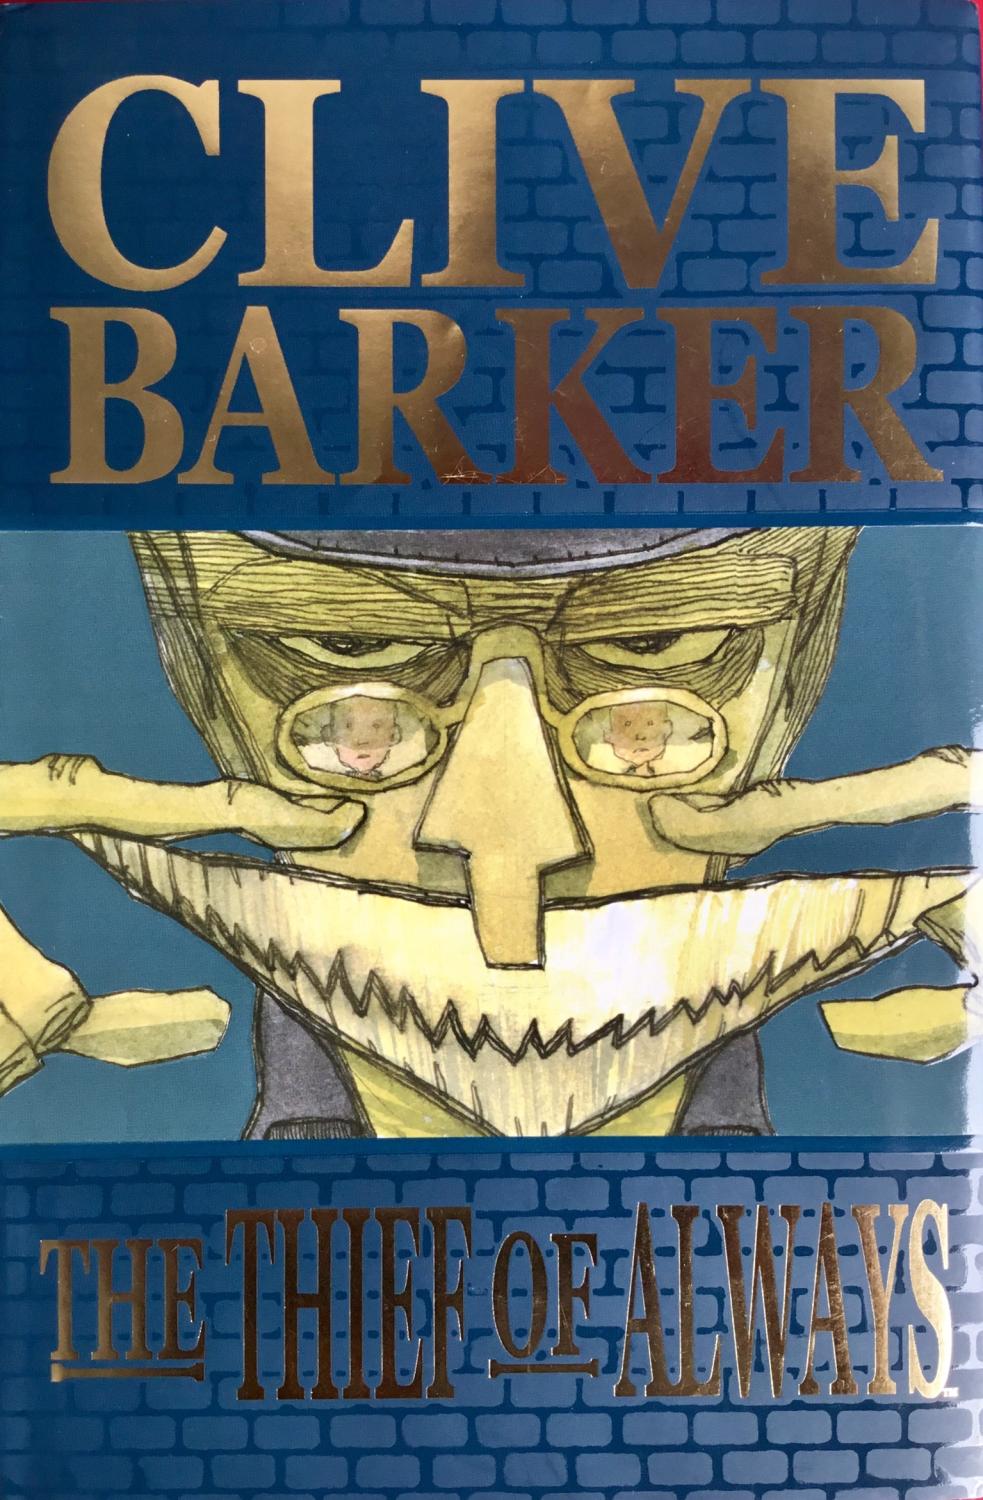 CLIVE BARKER'S The THIEF of ALWAYS (Signed & Numbered Ltd. Hardcover Edition) - OPRISKO, KRIS (adaptation) : BARKER, CLIVE (author)